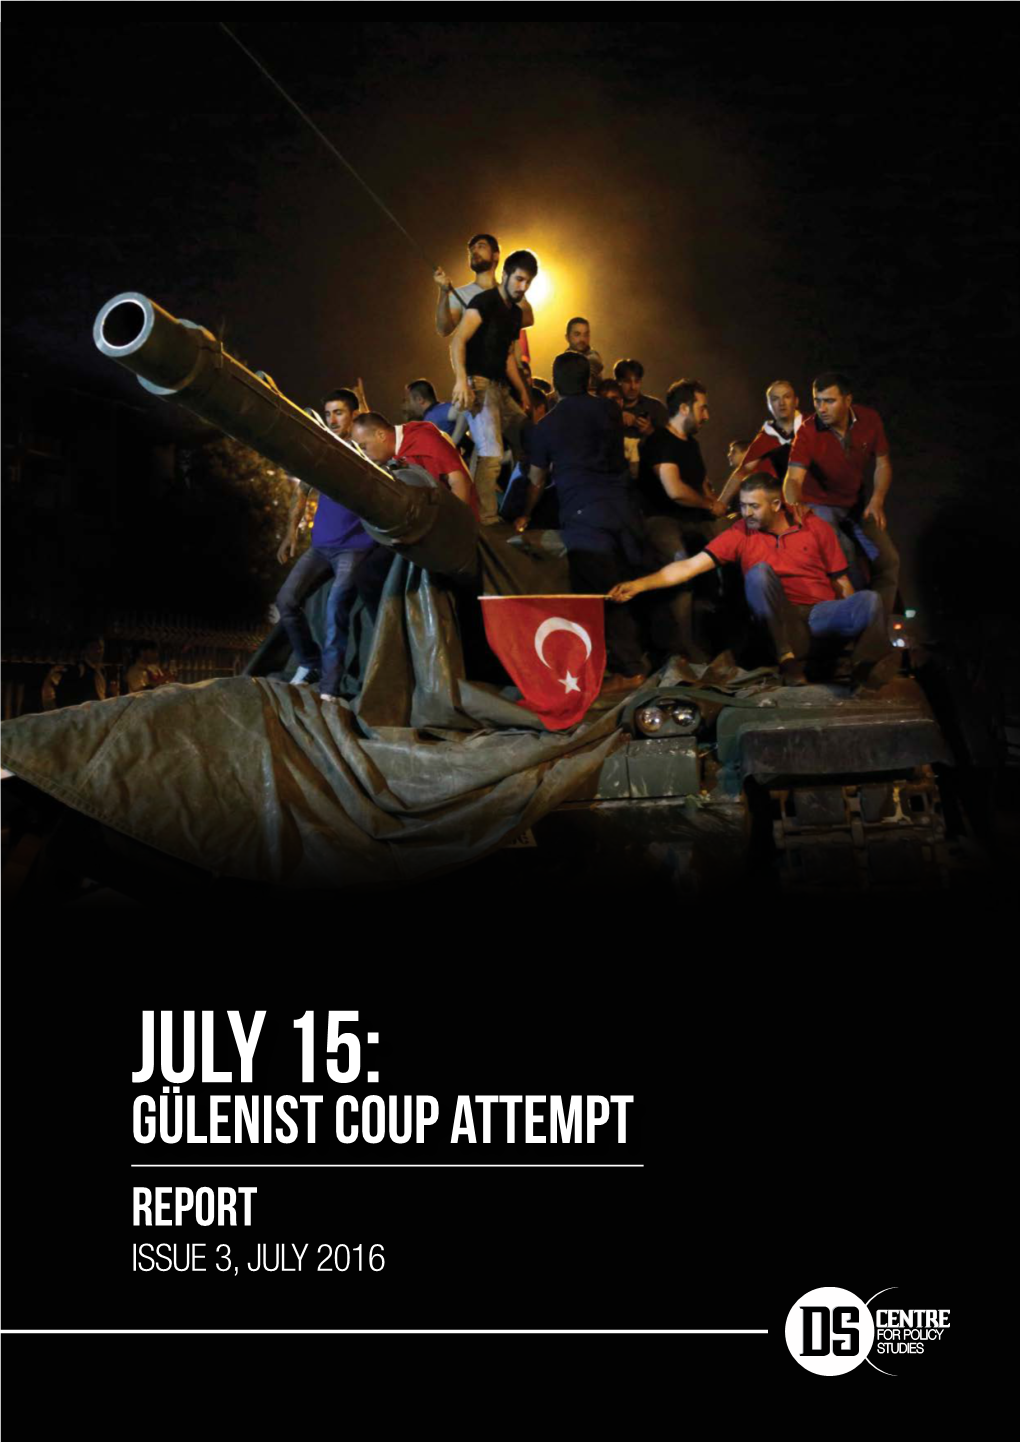 JULY 15: Gülenist Coup Attempt REPORT ISSUE 3, JULY 2016